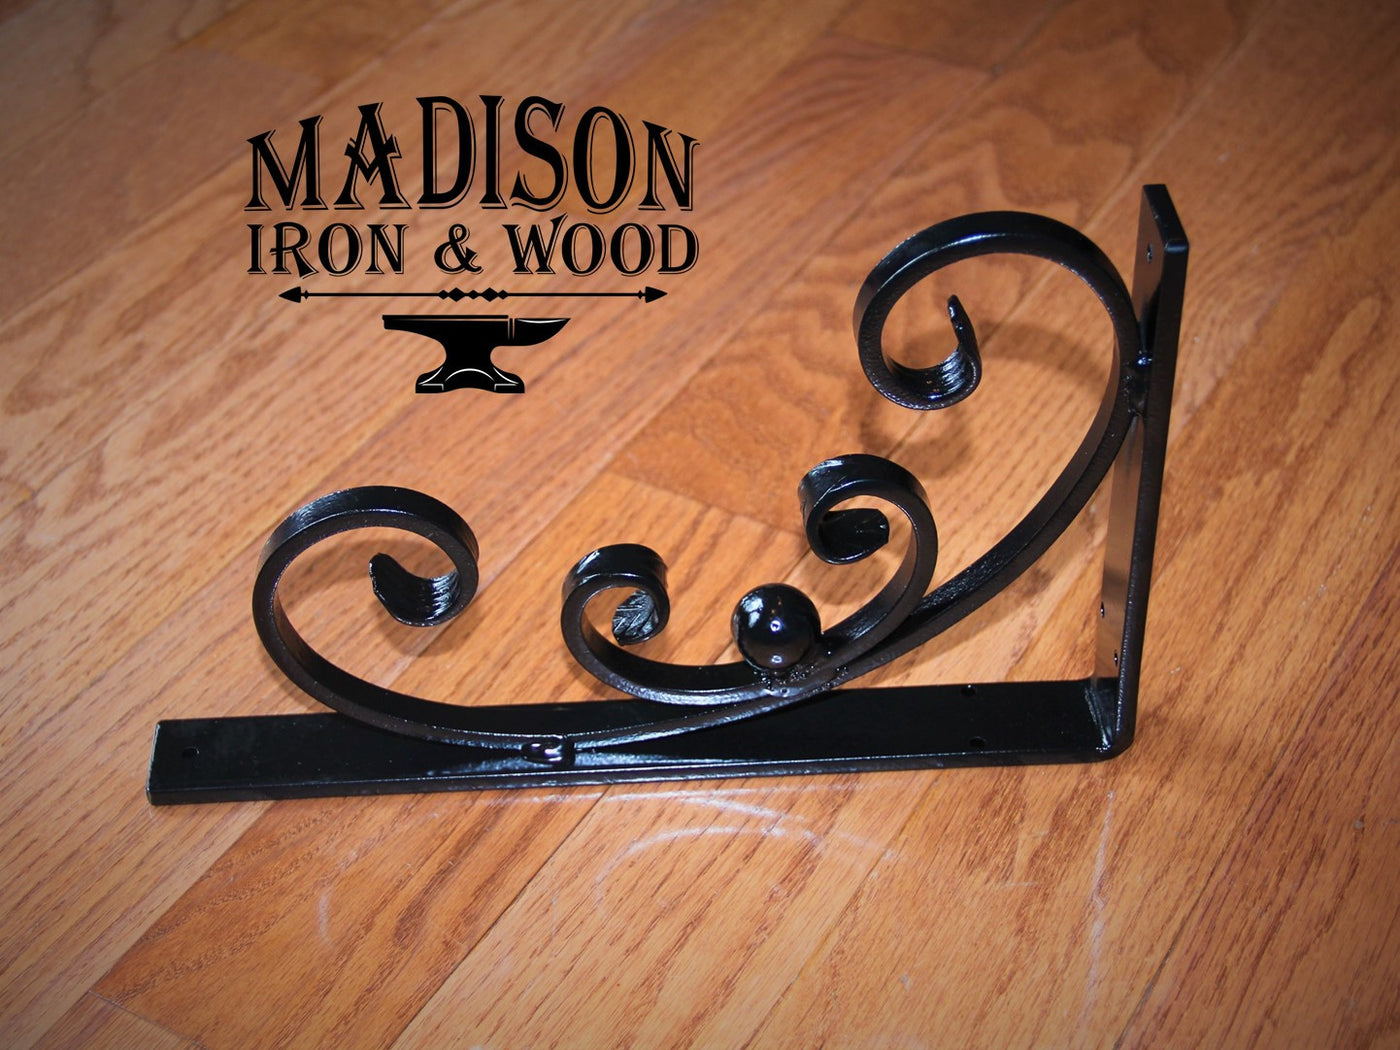 Heavy Duty Decorative Scrolled Shelf Bracket, Forged Angle Bracket - Madison Iron and Wood - Shelf Brackets - metal outdoor decor - Steel deocrations - american made products - veteran owned business products - fencing decorations - fencing supplies - custom wall decorations - personalized wall signs - steel - decorative post caps - steel post caps - metal post caps - brackets - structural brackets - home improvement - easter - easter decorations - easter gift - easter yard decor